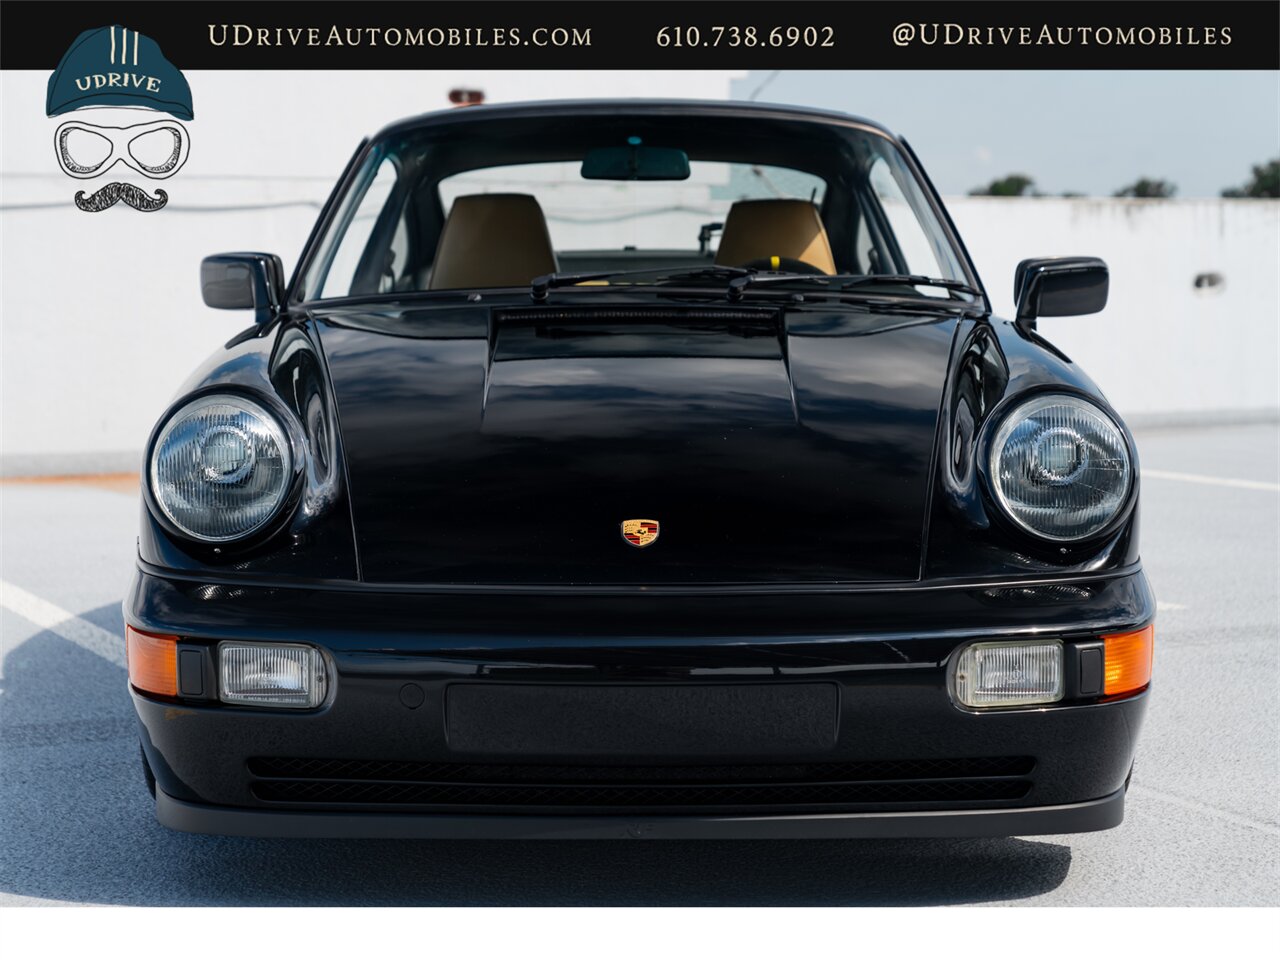 1989 Porsche 911 Carrera 4  964 C4 5 Speed Manual $63k Recent Service and Upgrades - Photo 10 - West Chester, PA 19382